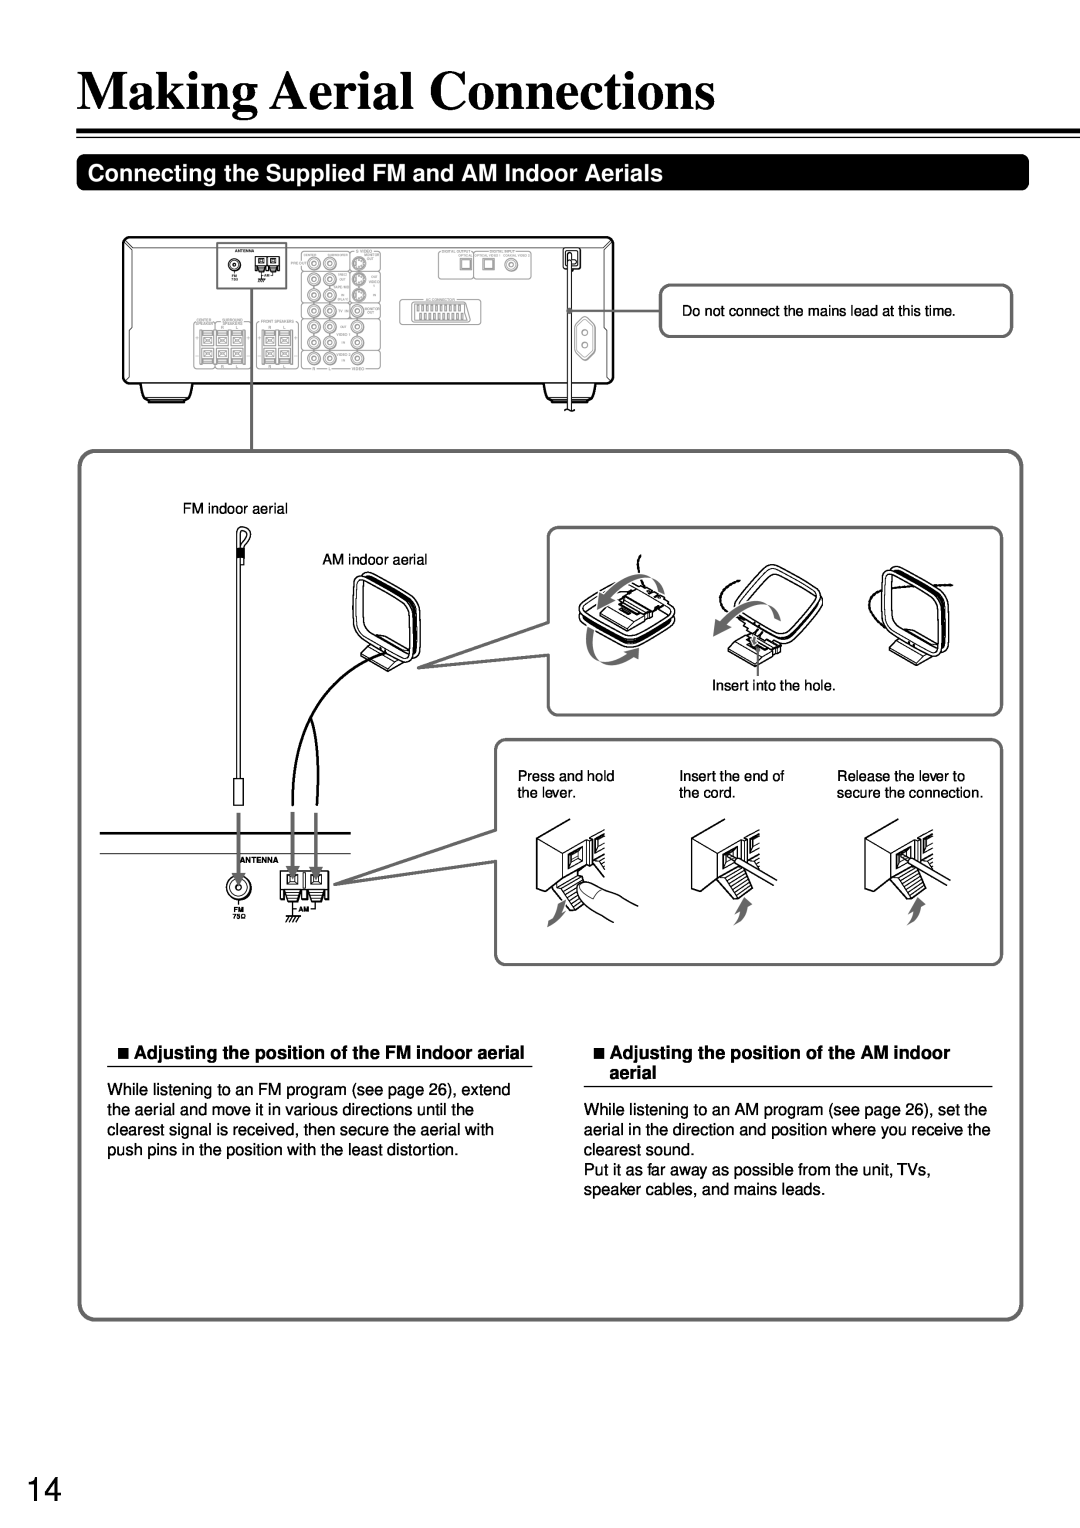 Onkyo DR-90 instruction manual Making Aerial Connections, Connecting the Supplied FM and AM Indoor Aerials 